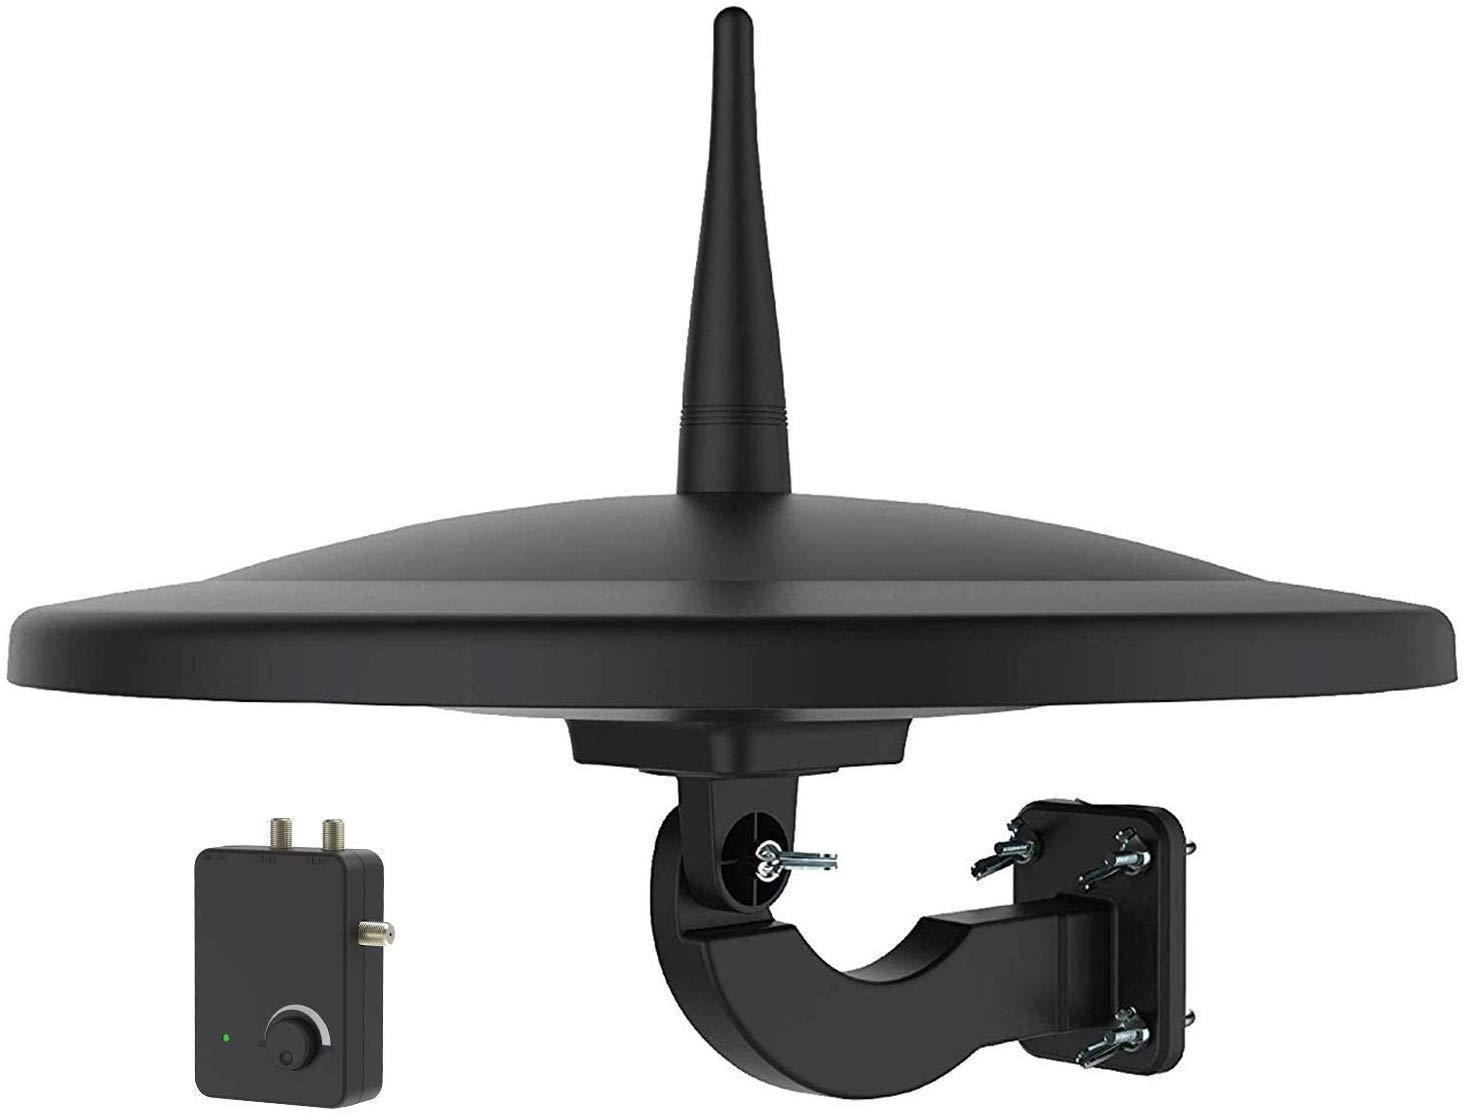 1byone Omni Directional Outdoor TV Antenna, VHF/UHF 720° Reception UFO Clean Design -$109.99 MSRP